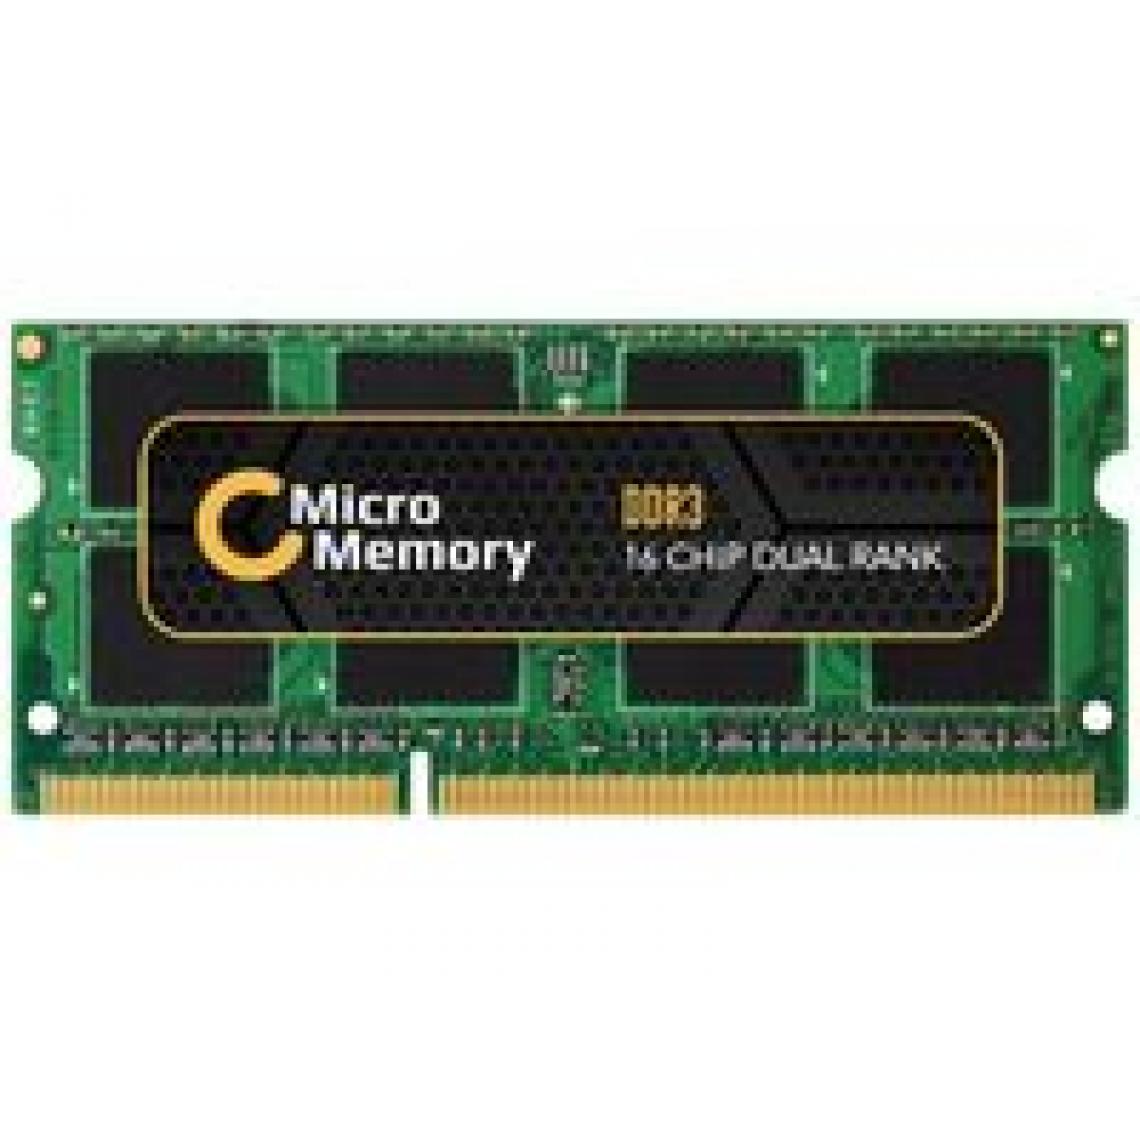 Because Music - 8GB DDR3 1600MHZ SO-DIMM Module - RAM PC Fixe